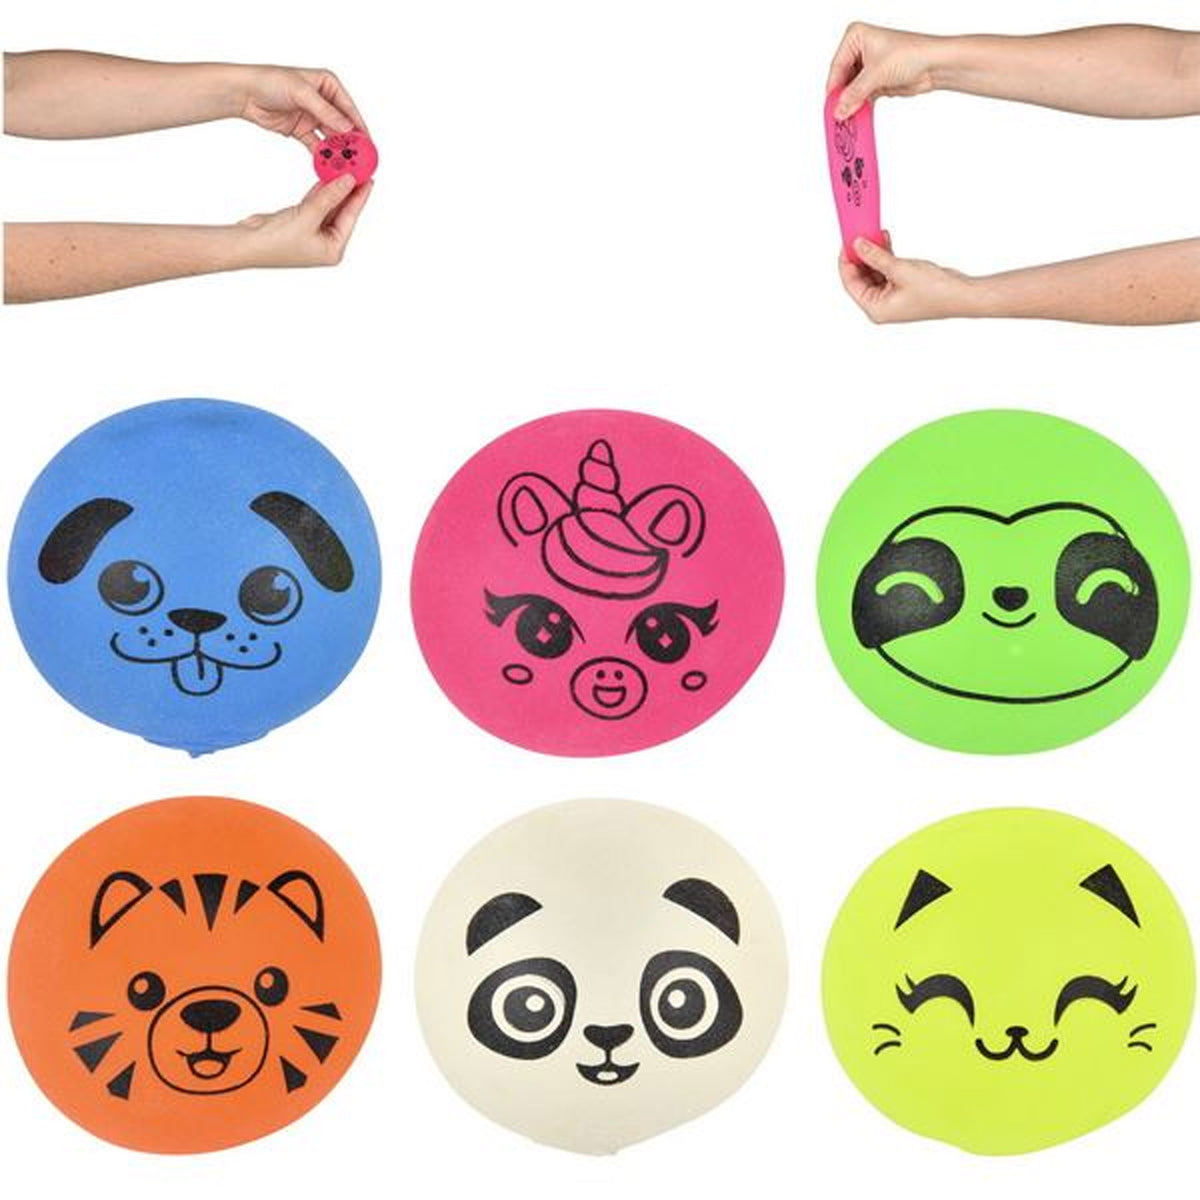 Squeezy Animal Faces Ball Soft and Stretchy Balls Assorted Colors MOQ-12